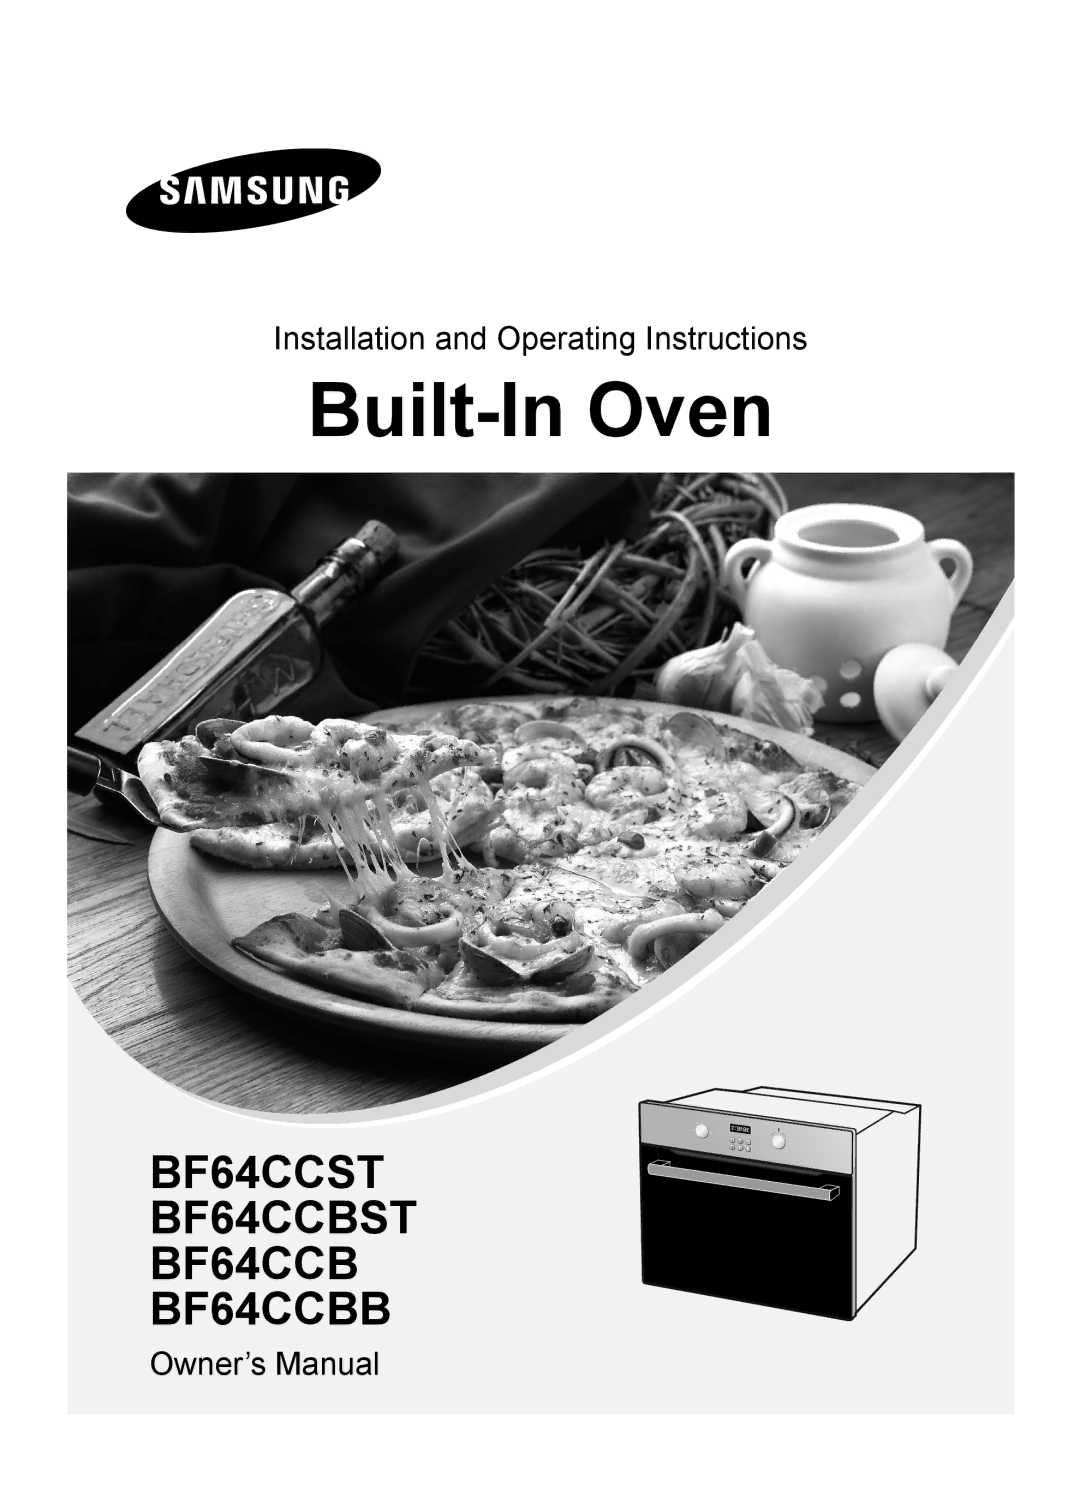 Samsung BF64CCST/SLI manual Built-In Oven 